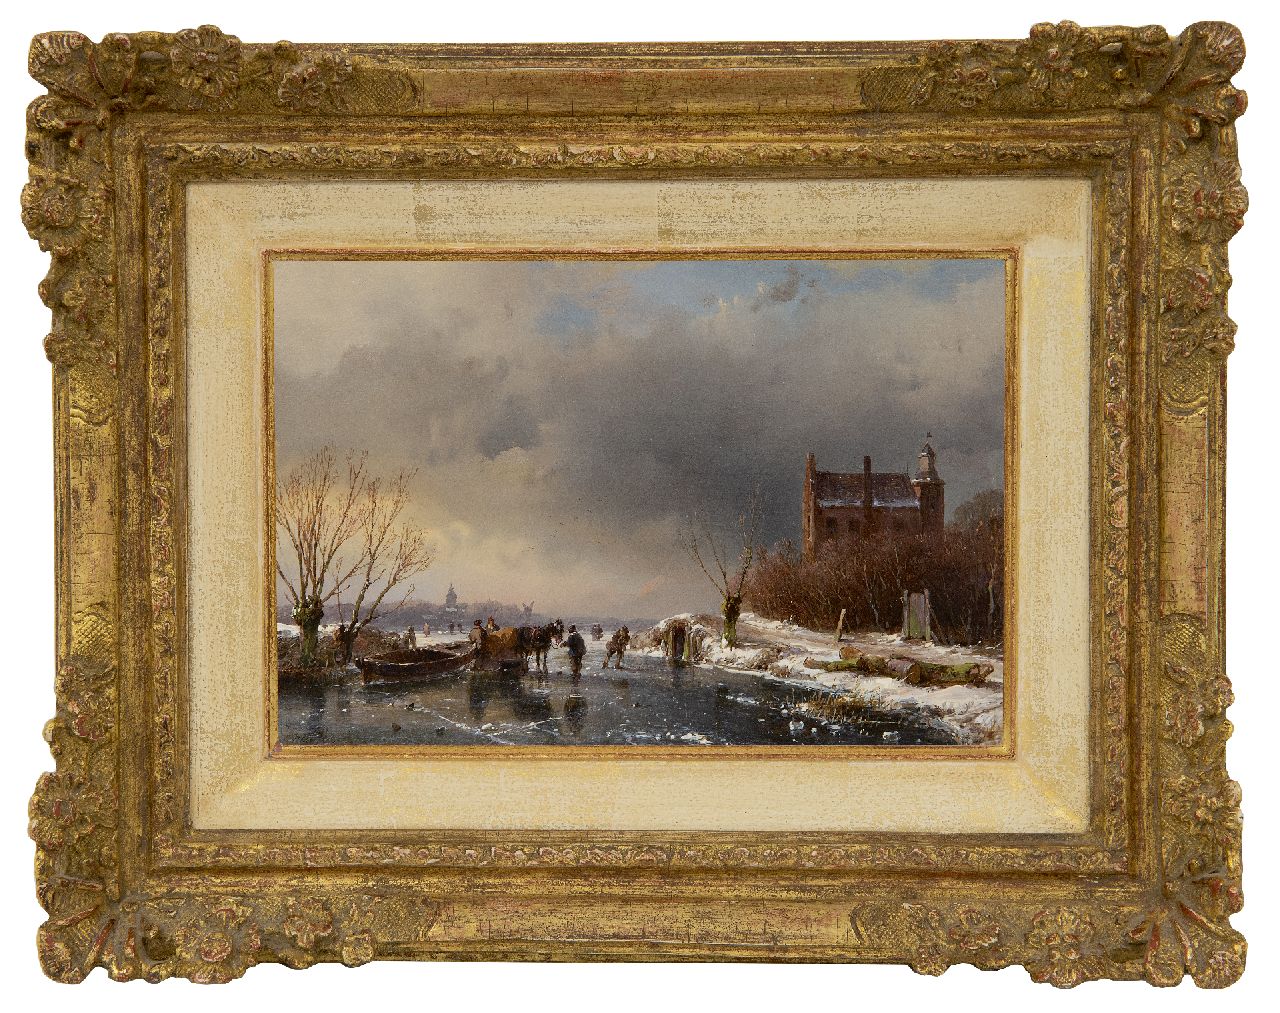 Schelfhout A.  | Andreas Schelfhout, A frozen waterway near a castle, oil on panel 15.3 x 22.7 cm, signed l.l. and dated '51